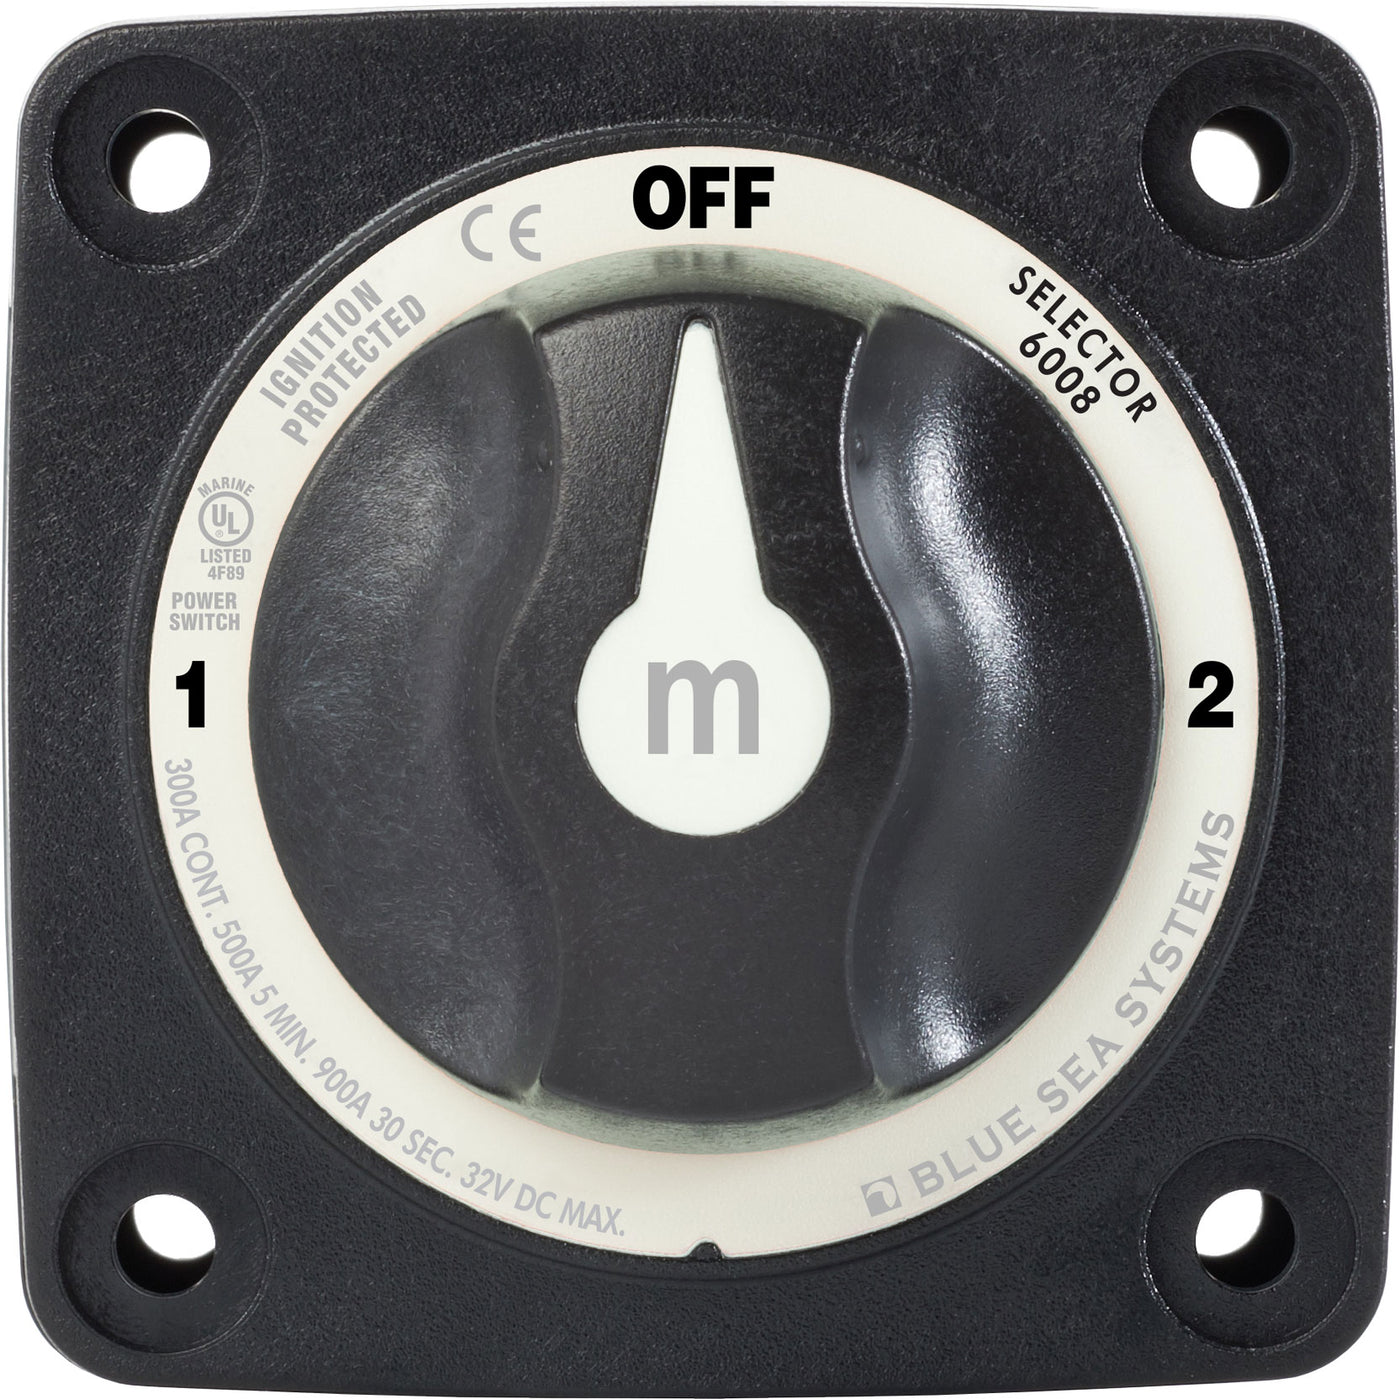 Blue Sea 6008200 m-Series Selector 3 Position Battery Switch - Black